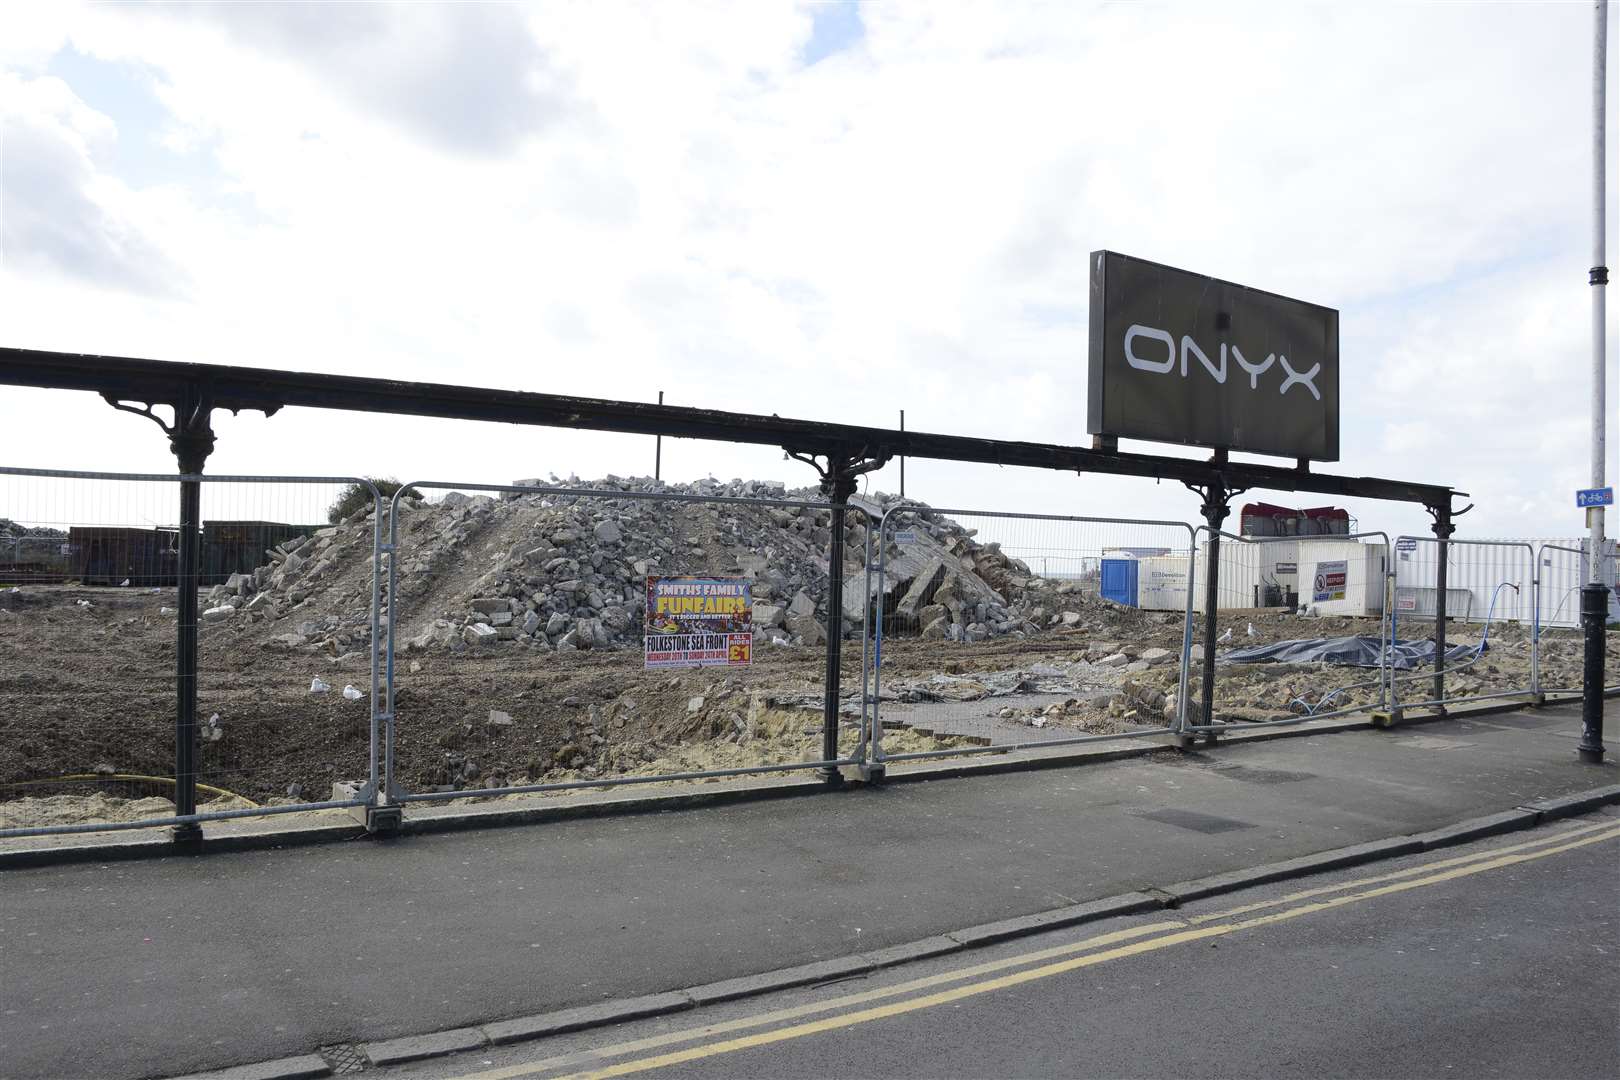 The Onyx nightclub was demolished fully a month after the fire